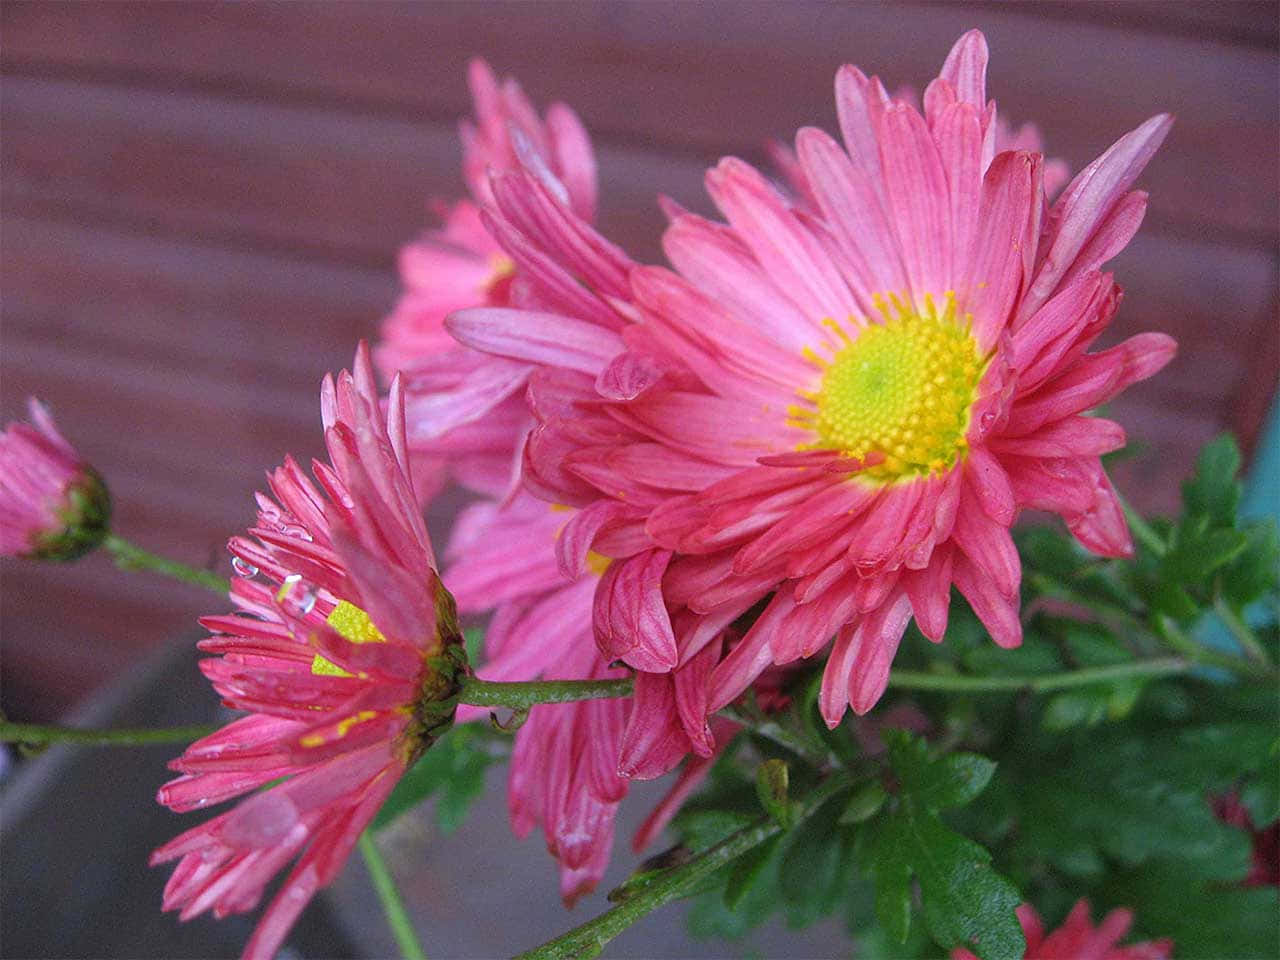 A bright and colorful Chrysanthemum in bloom